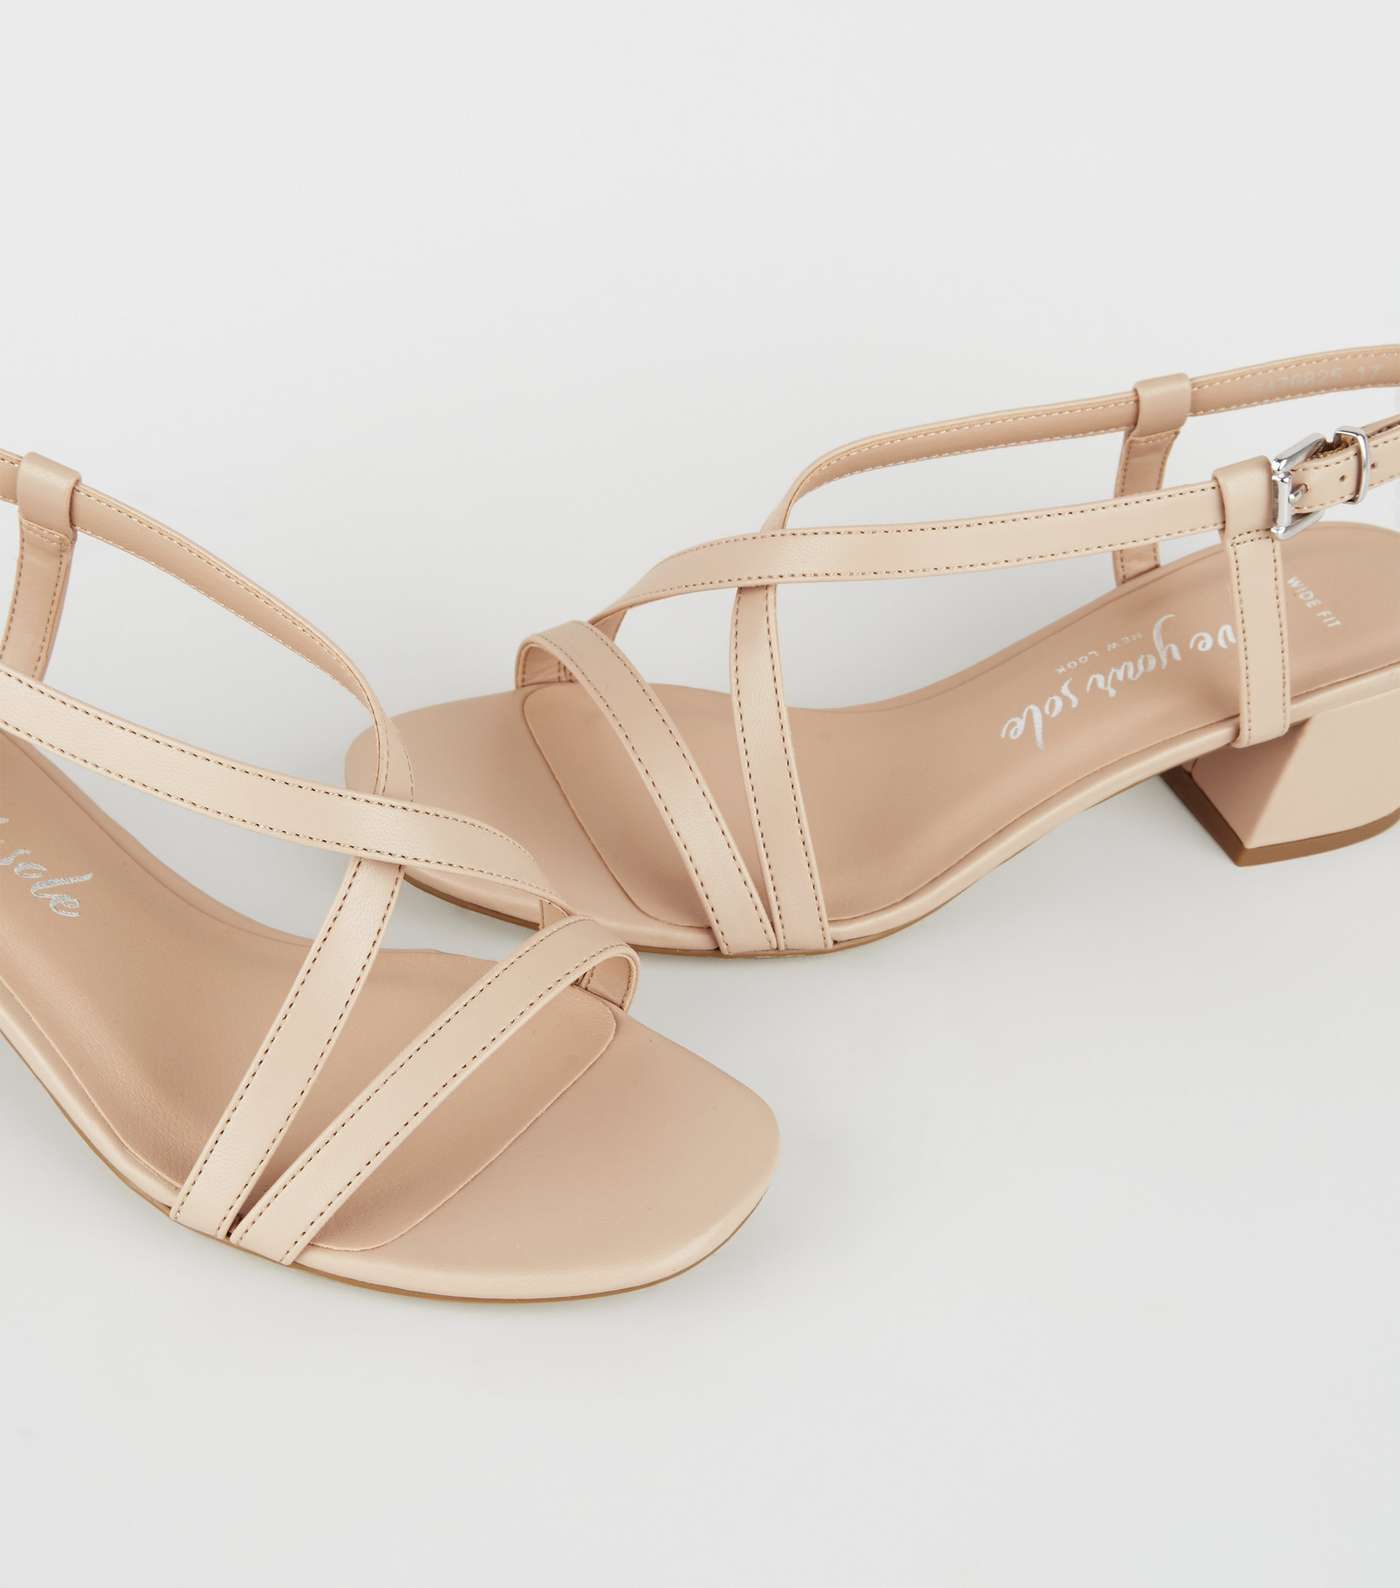 Wide Fit Camel Strappy Low Heel Sandals Image 4